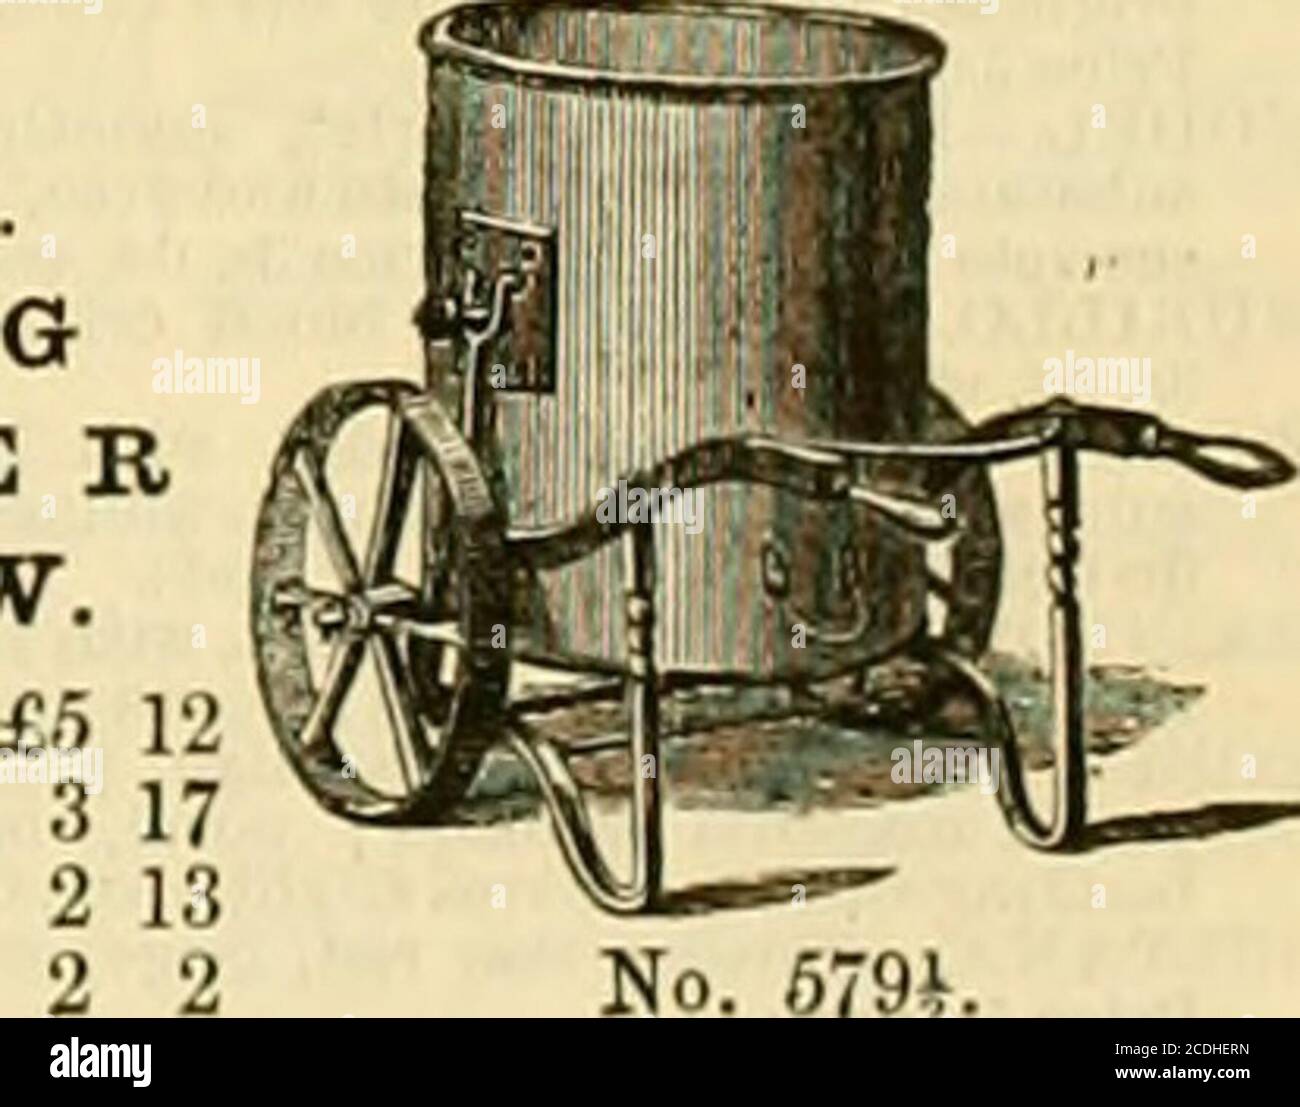 . The Gardeners' chronicle and agricultural gazette . No. 579J. SWING WATER BARROW. 50 Gals. ROYAL AGRICULTURAL SHOW, held atBURY ST. EDMUNDS, 1867. — A SILVERMEDAL was Awarded to JOHN WARNERAND SONS CHAIN PUMP. This Pump, fromthe entire absence of Valves, is especially adaptedfor the use of Builders, Contractors, and Farmers. WIND ENGINES, ADAPTED FOR PUMPING, CHAFF-CUTTING, GRINDING, &c. JOHN WARNER AND SONS beg to inform the Trade and the Public generally that they have purchased the Patterns of the WIND ENGINES manufactured by the late-TV t^^ Y^^ * PoLLiKD, of Southwark, and are prepared t Stock Photo